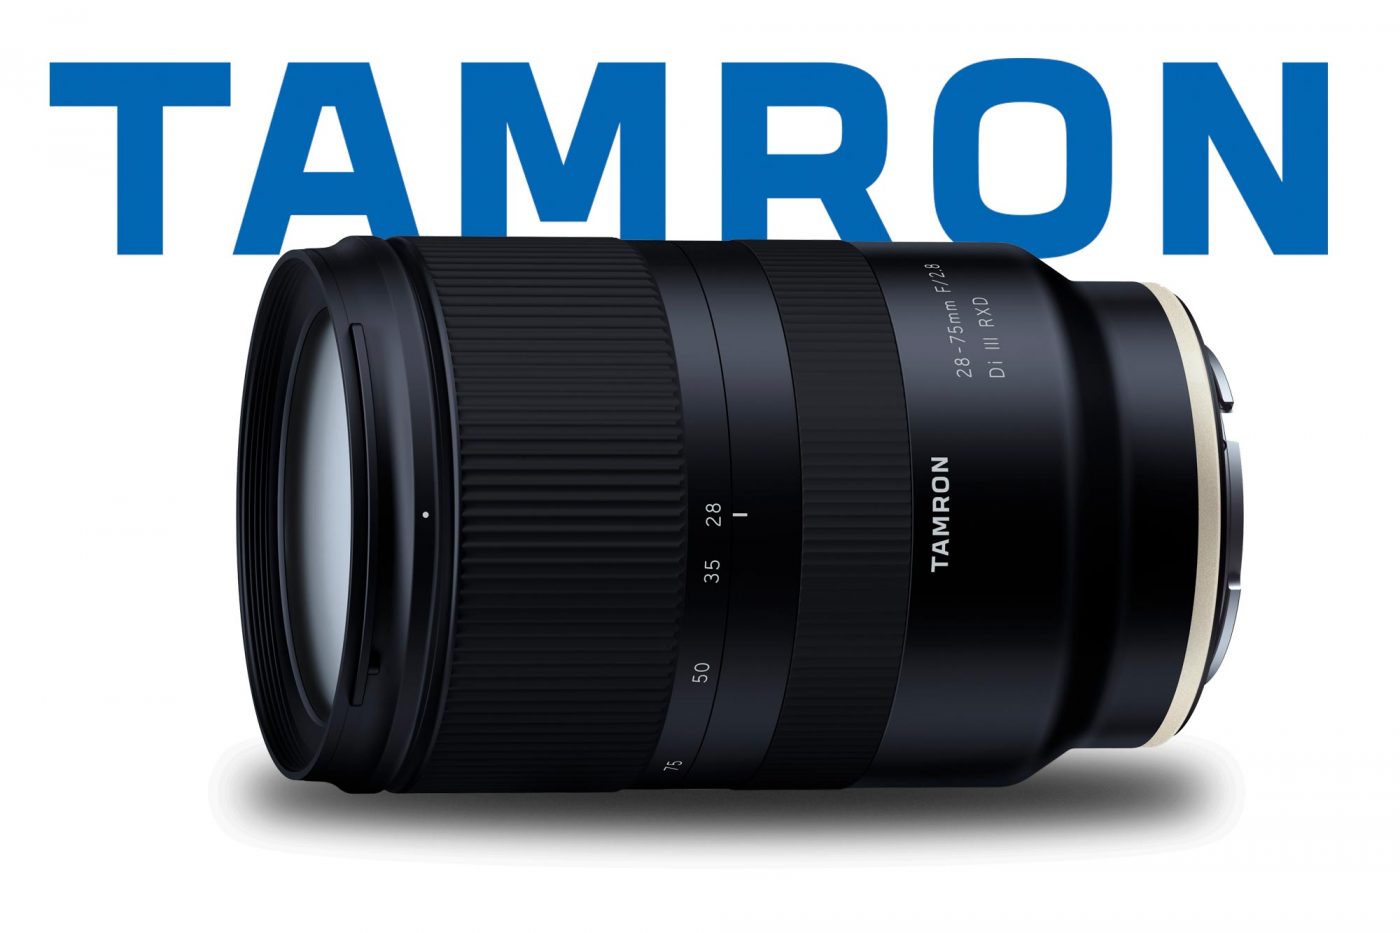 New Tamron 28-75 f/2.8 Lens: Their First for Sony FE-Mount - Light